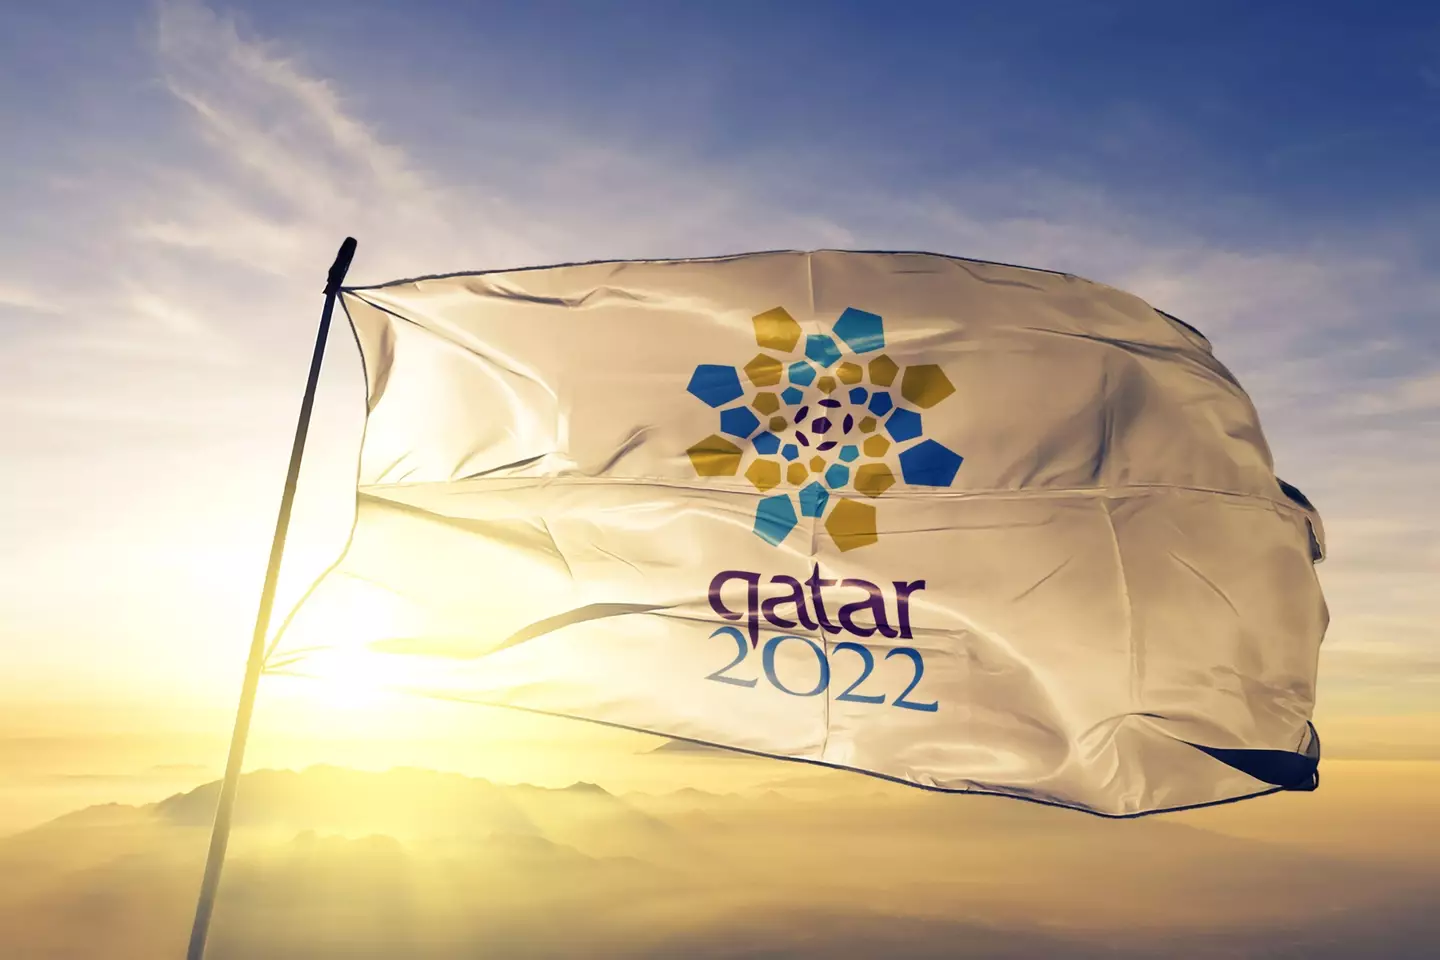 The World Cup 2022 will be held in Qatar.